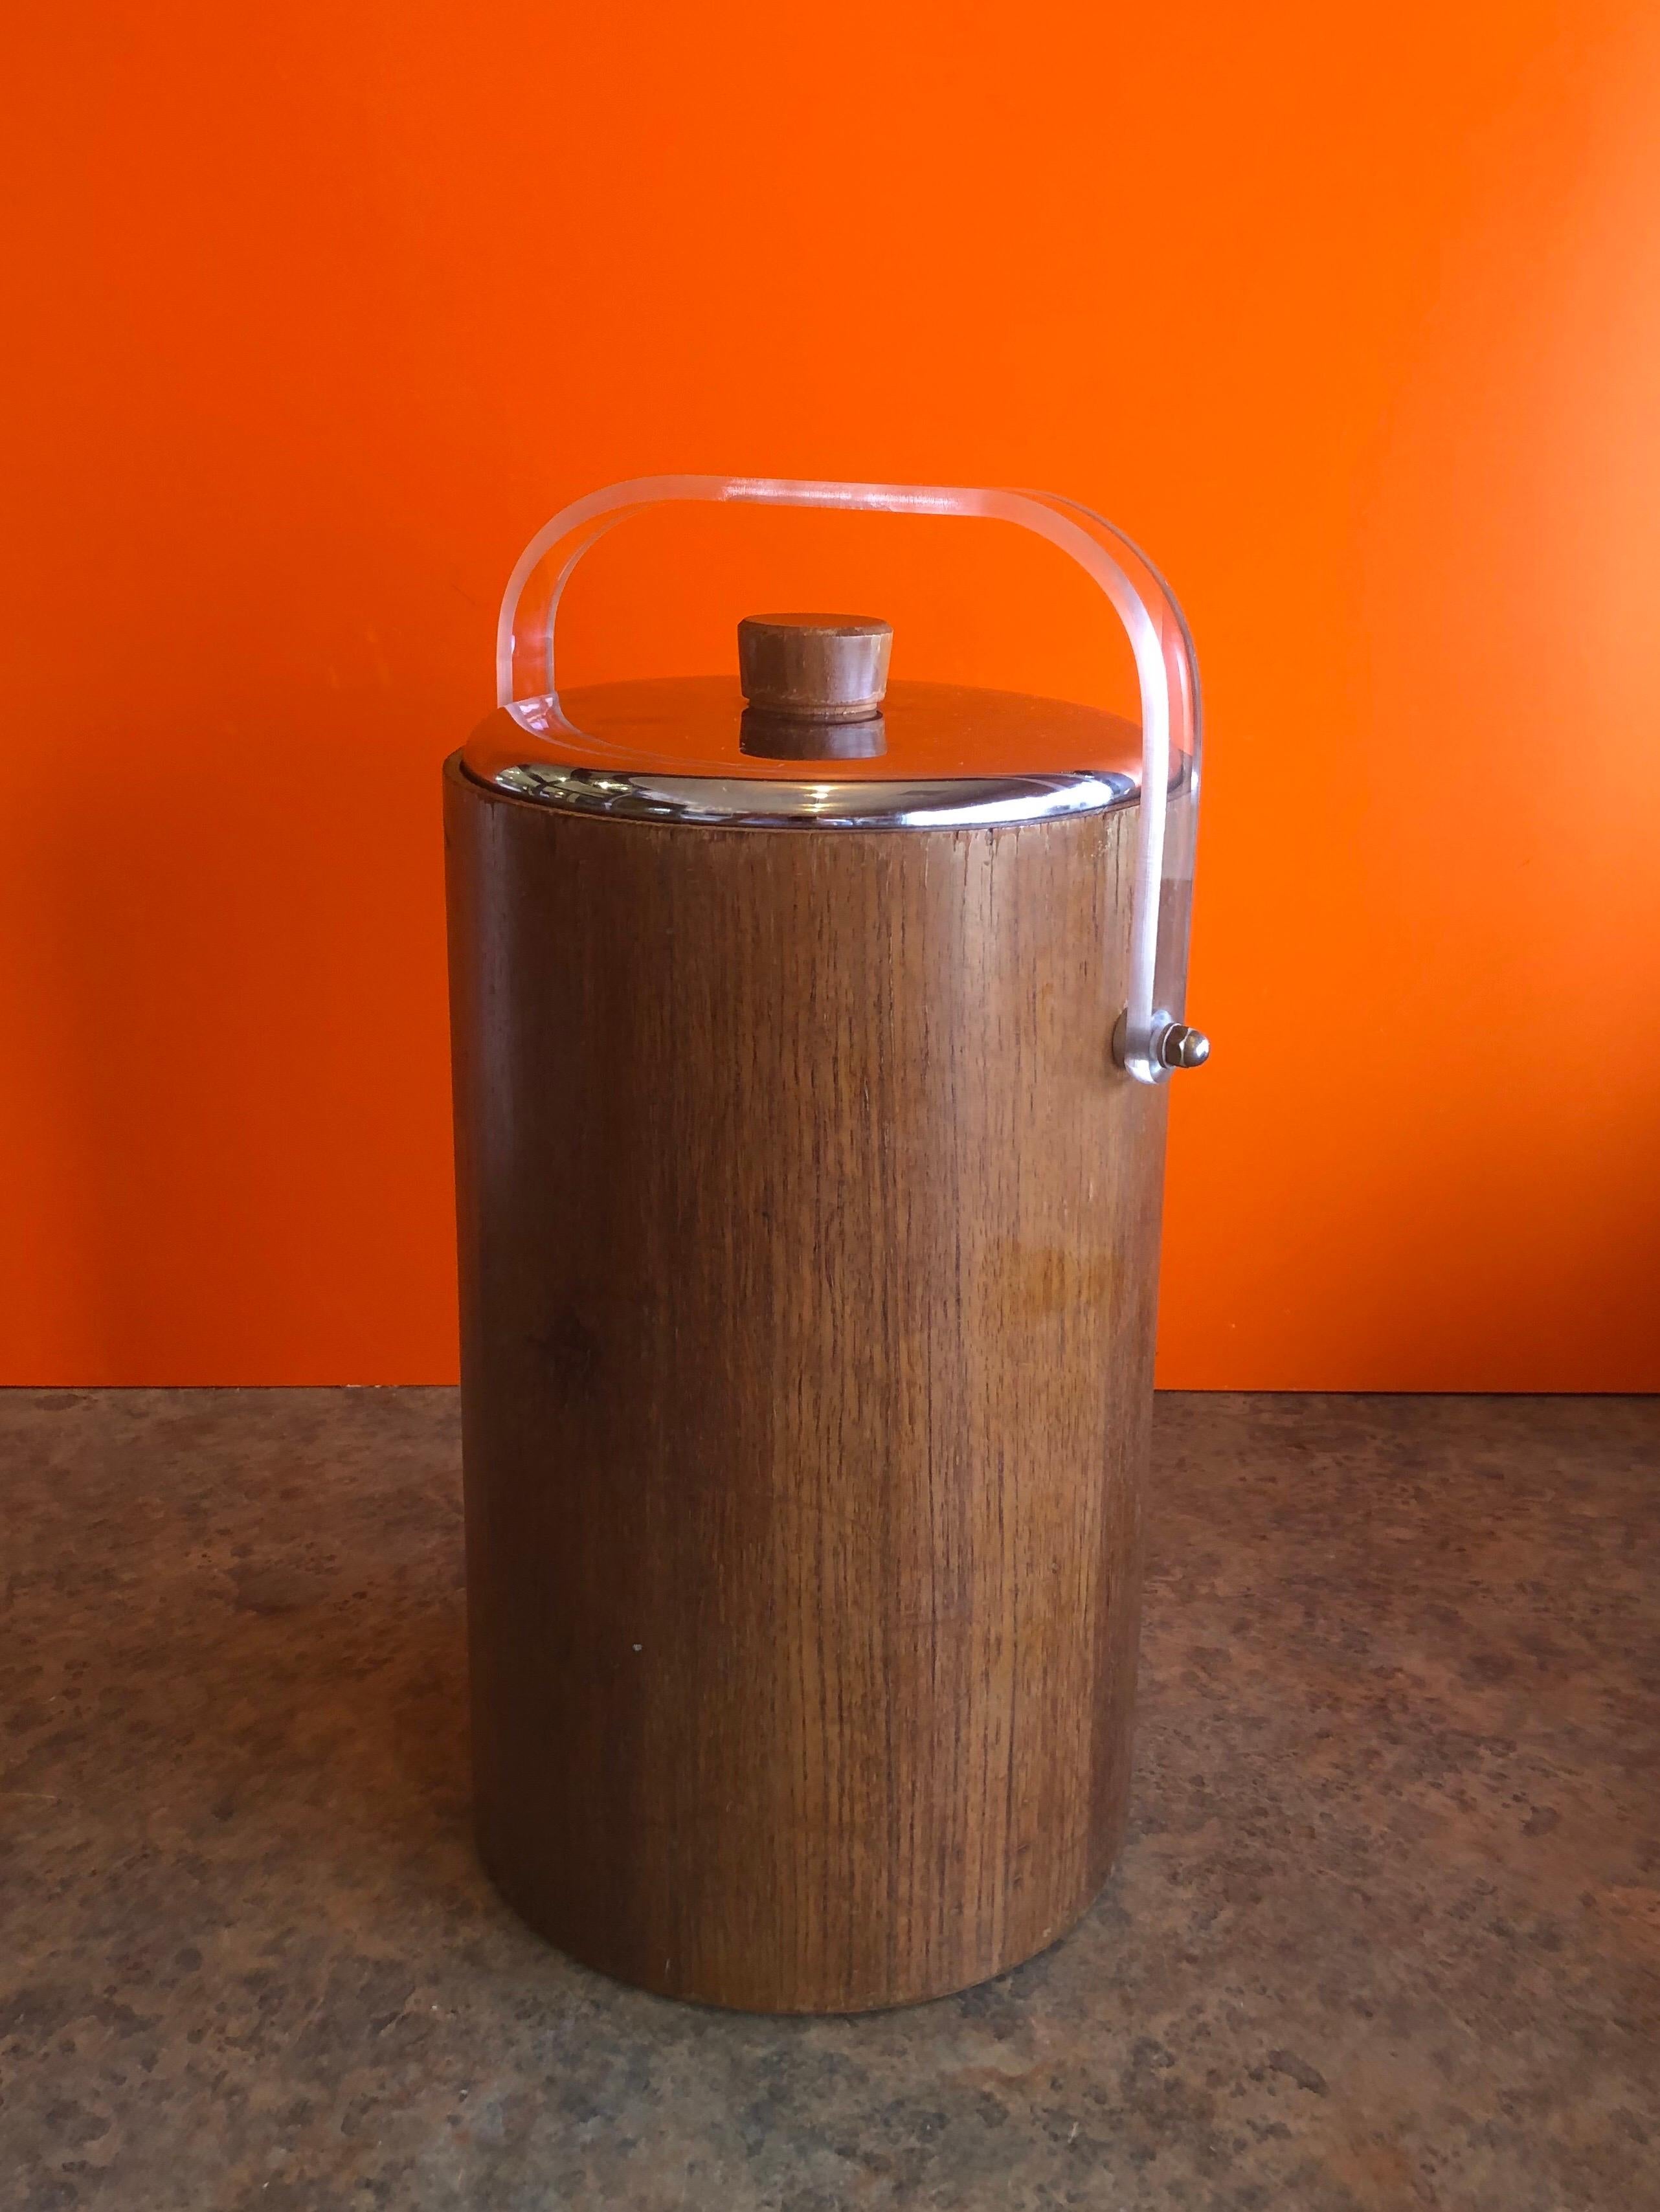 A very nice large midcentury teak ice bucket with Thermos glass liner, chrome lid and acrylic handle by The American Thermos Bottle Co, circa 1960s. The piece is very solid and sturdy piece that is also hard to find due to the glass Thermos liner.